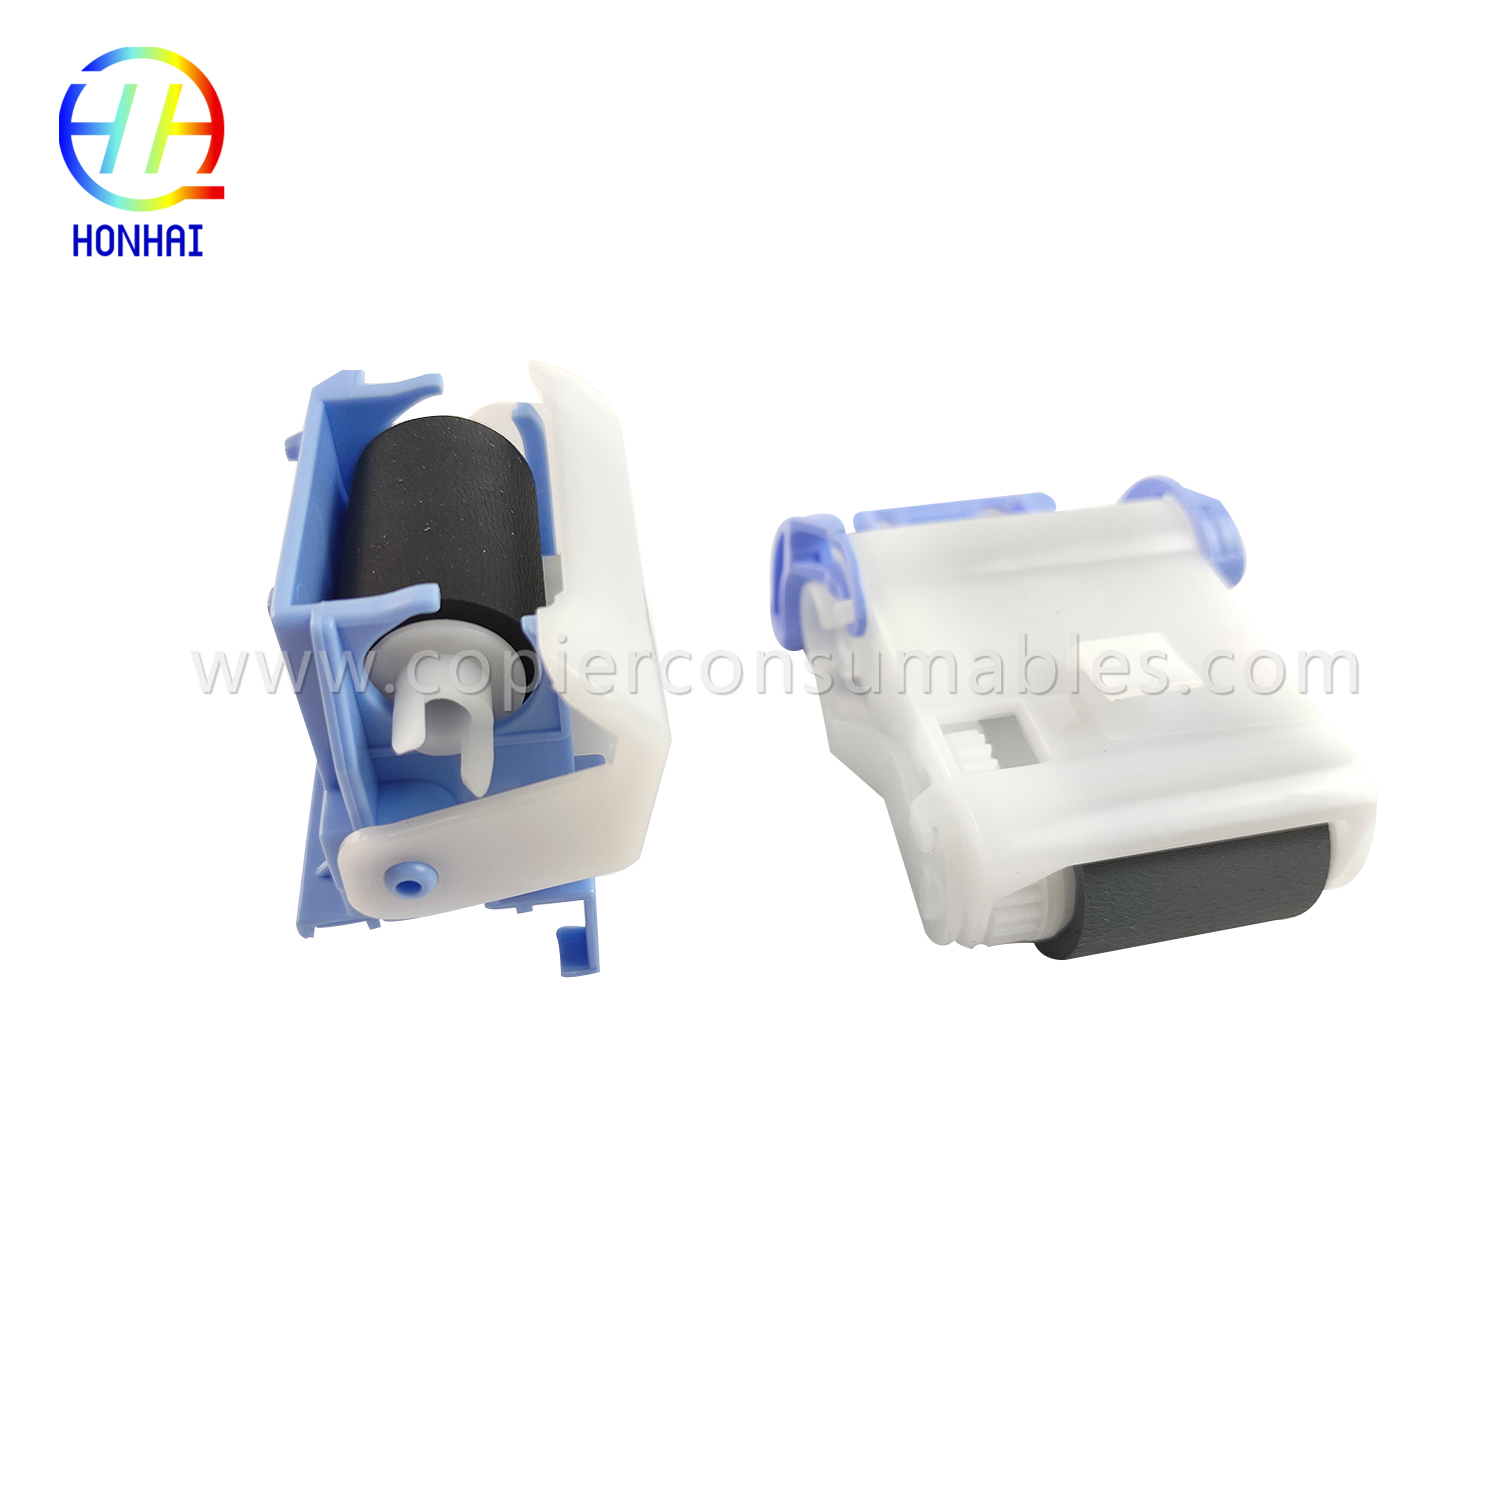 Separation & Pickup Feed Assemblies, Tray 2 for HP Laserjet Enterprise M607, Laserjet Enterprise M608, M609, M631, M632, M633 J8J70-67904 （1） (3) 拷贝